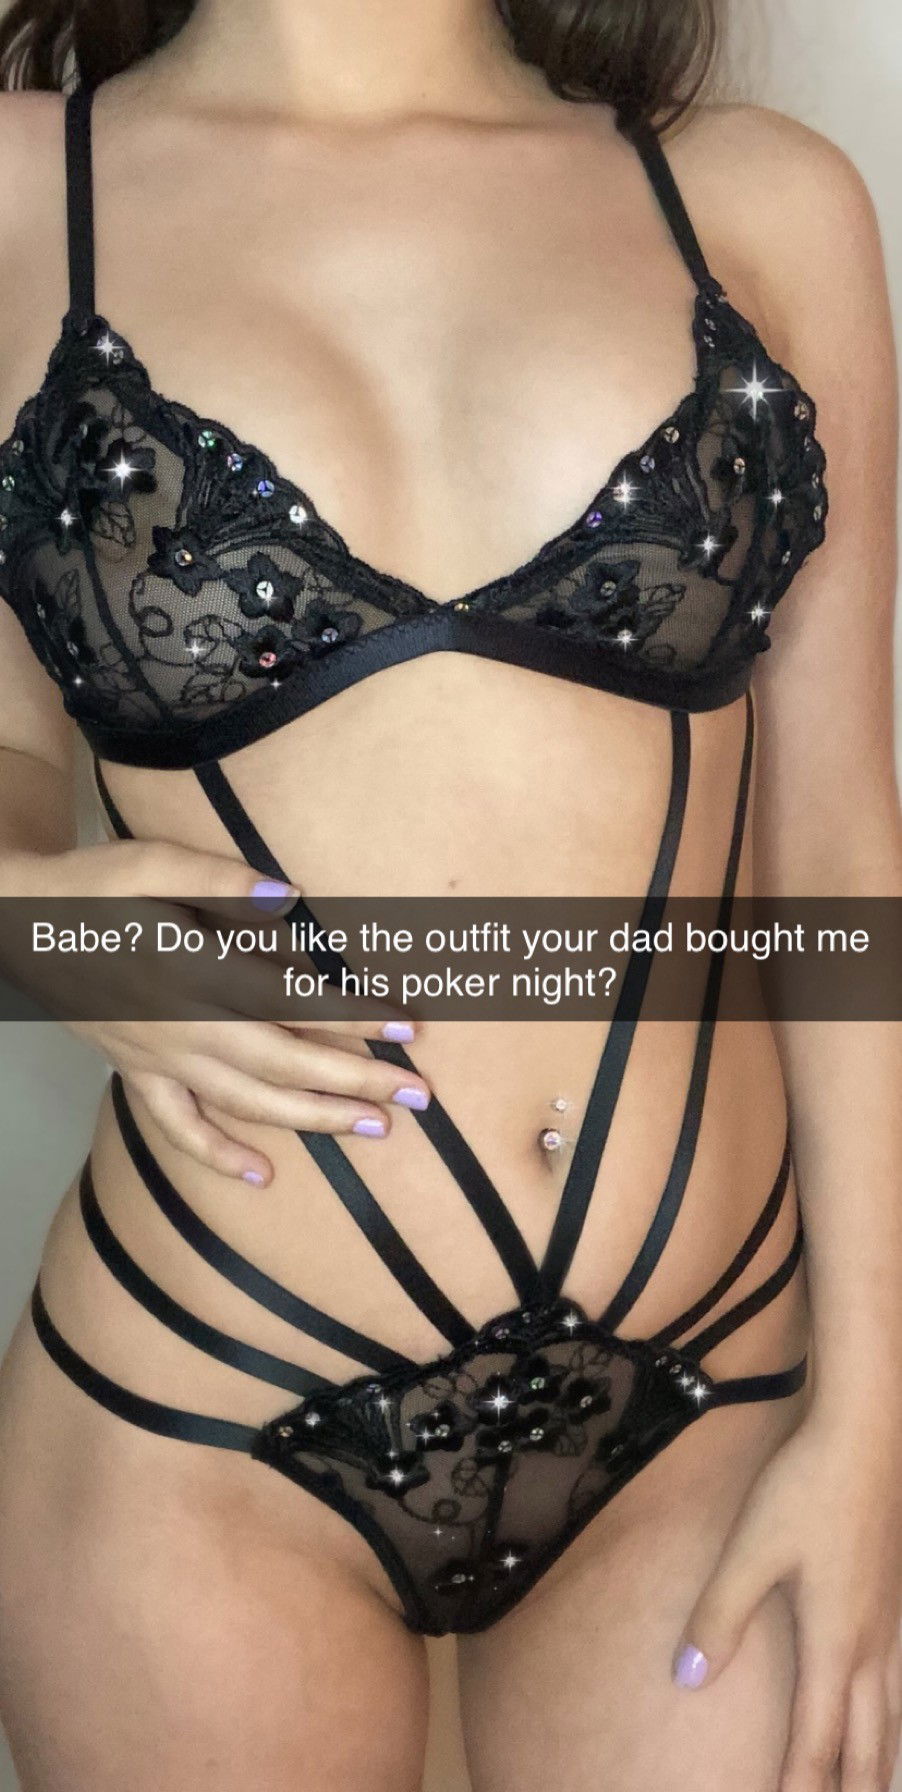 Photo by Mr. & Mrs. V with the username @sieficktfremd,  September 5, 2020 at 9:03 AM. The post is about the topic Hotwife/Cuckold Snapchat and the text says 'He bought her a new outfit...

#cuckold #cheating #teasing'